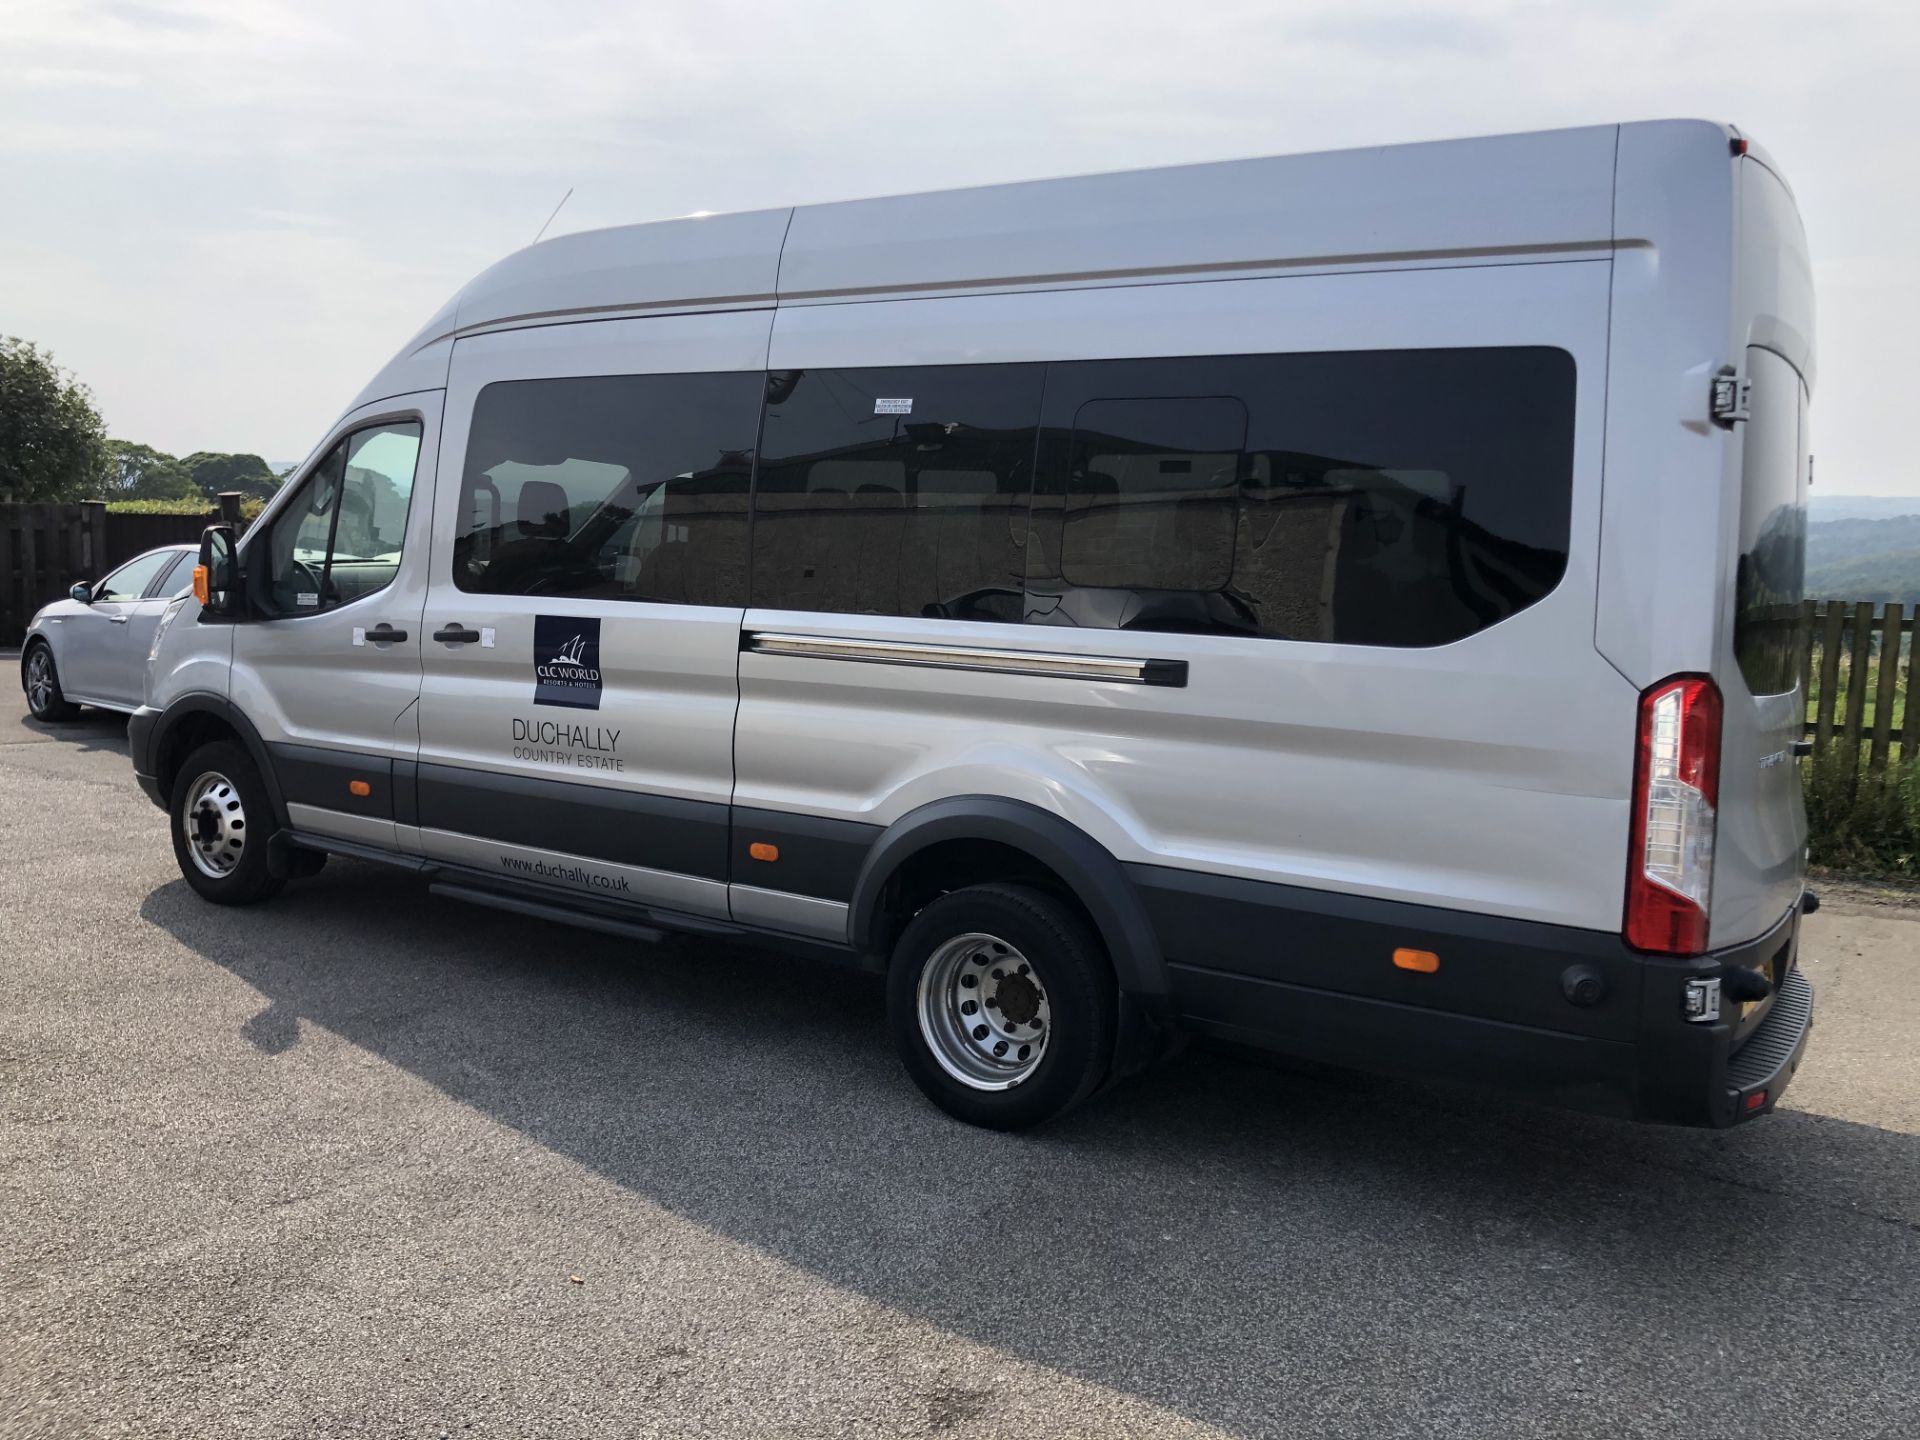 2017/17 REG FORD TRANSIT 460 TREND ECONETIC 2.2 DIESEL 17 SEAT MINIBUS, SHOWING 0 FORMER KEEPERS - Image 5 of 12